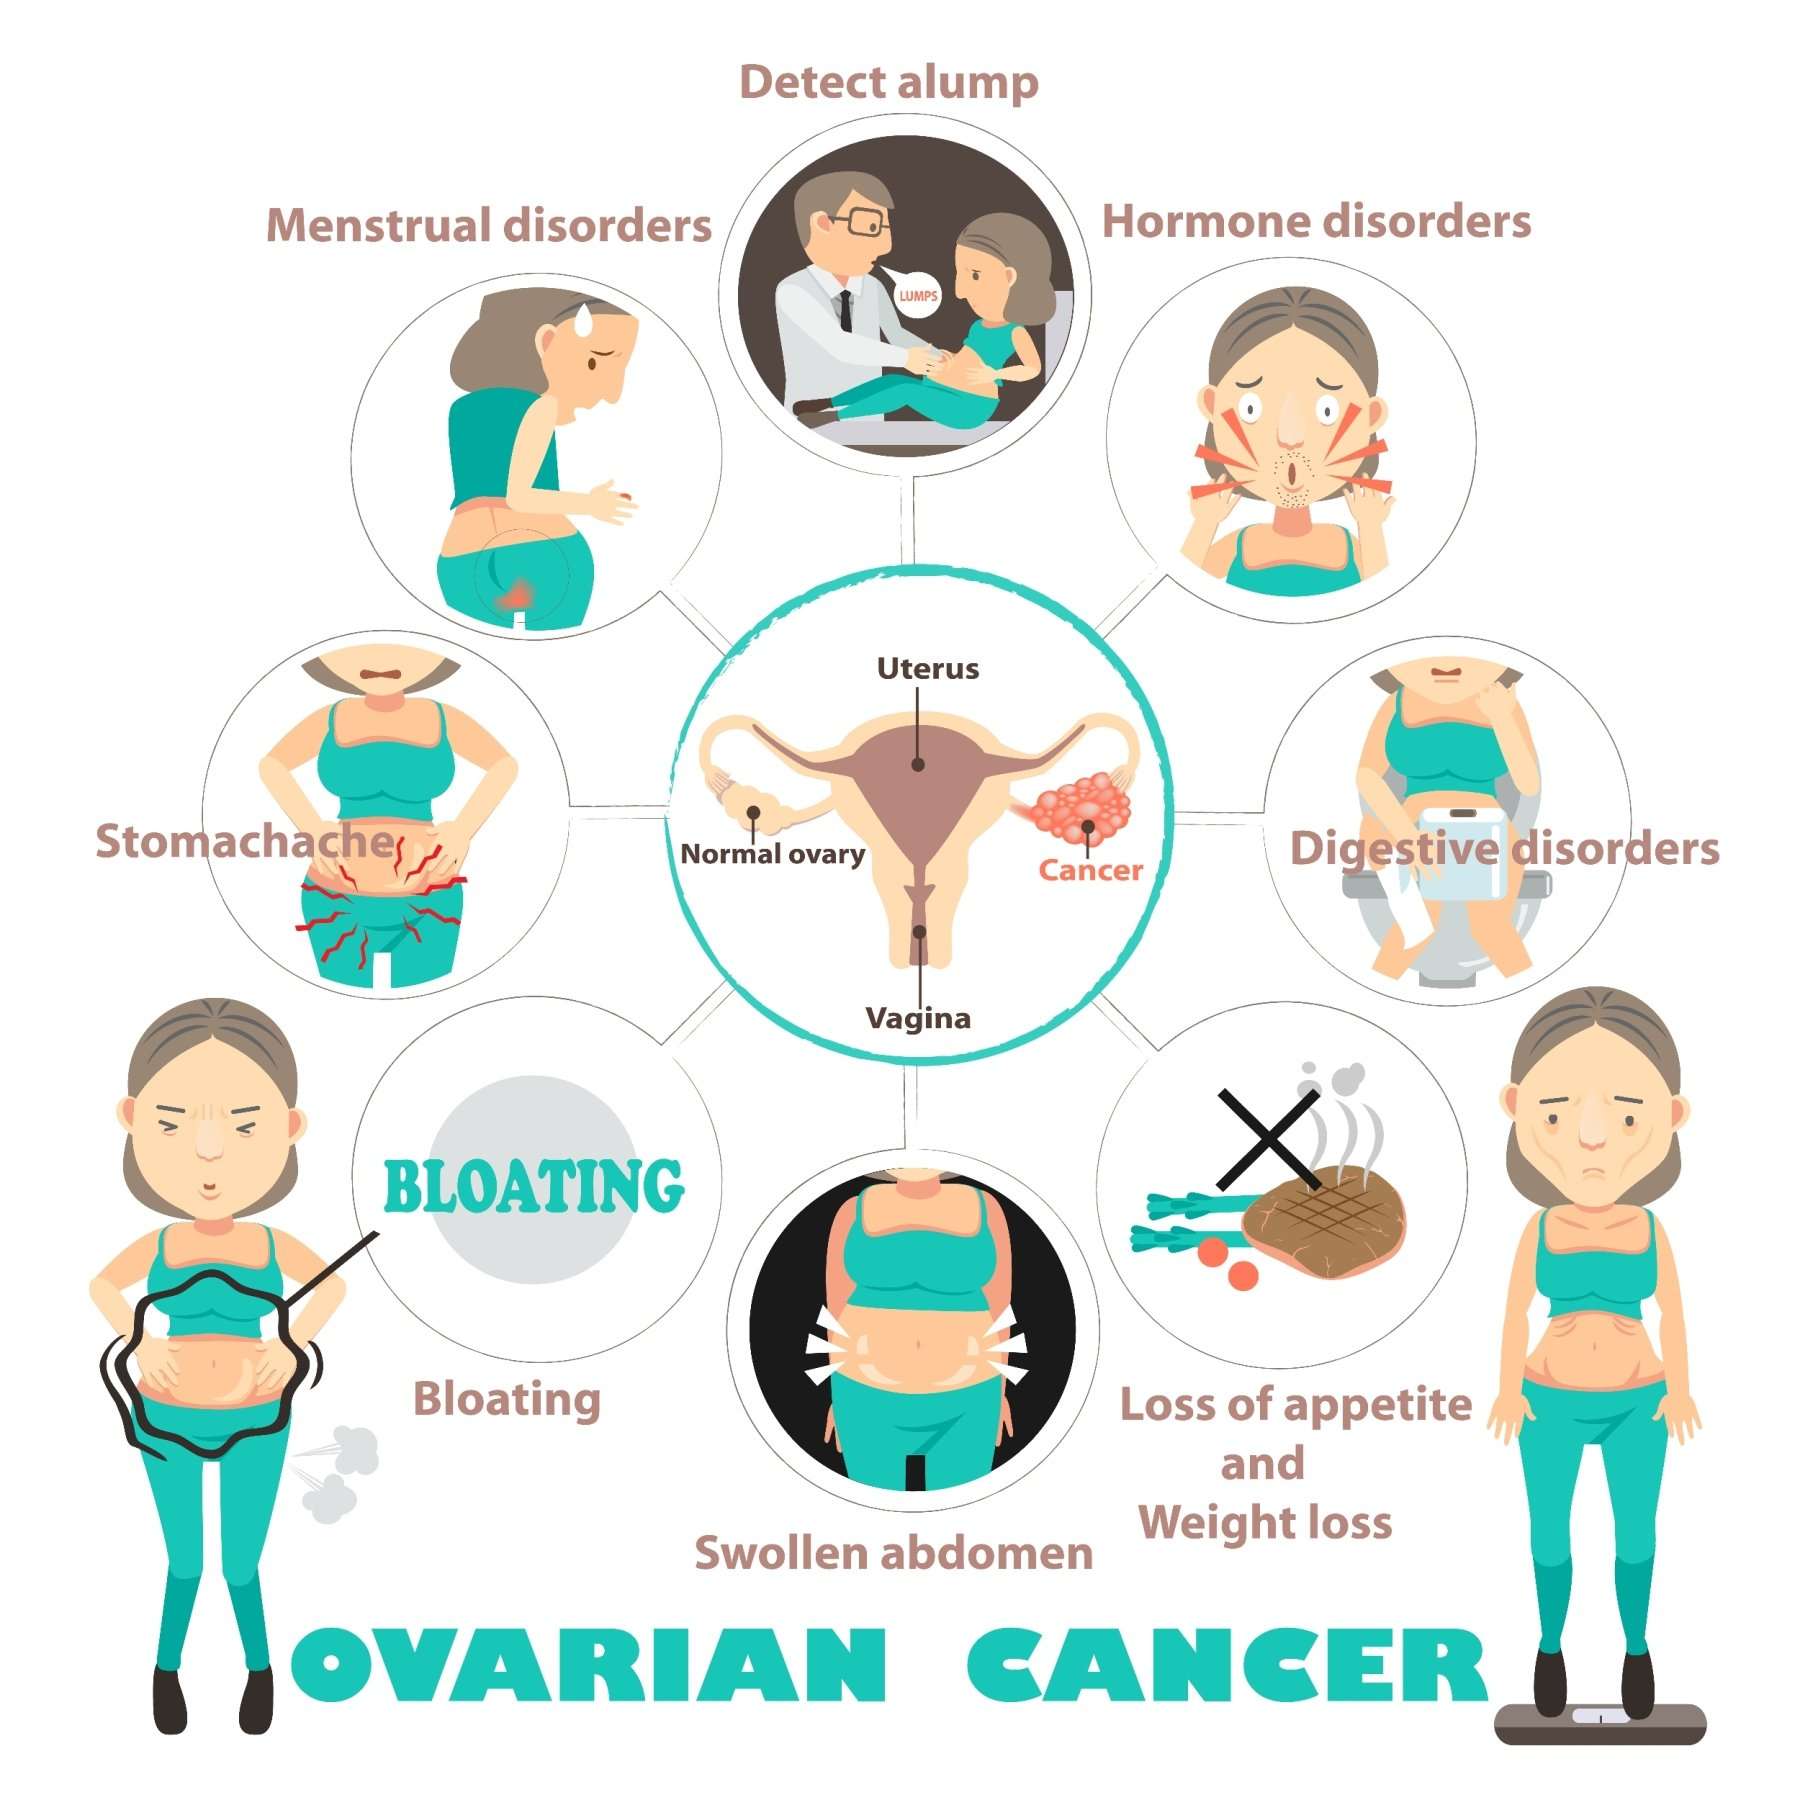 BE AWARE OF THE FOUR MAIN SYMPTOMS OF OVARIAN CANCER: